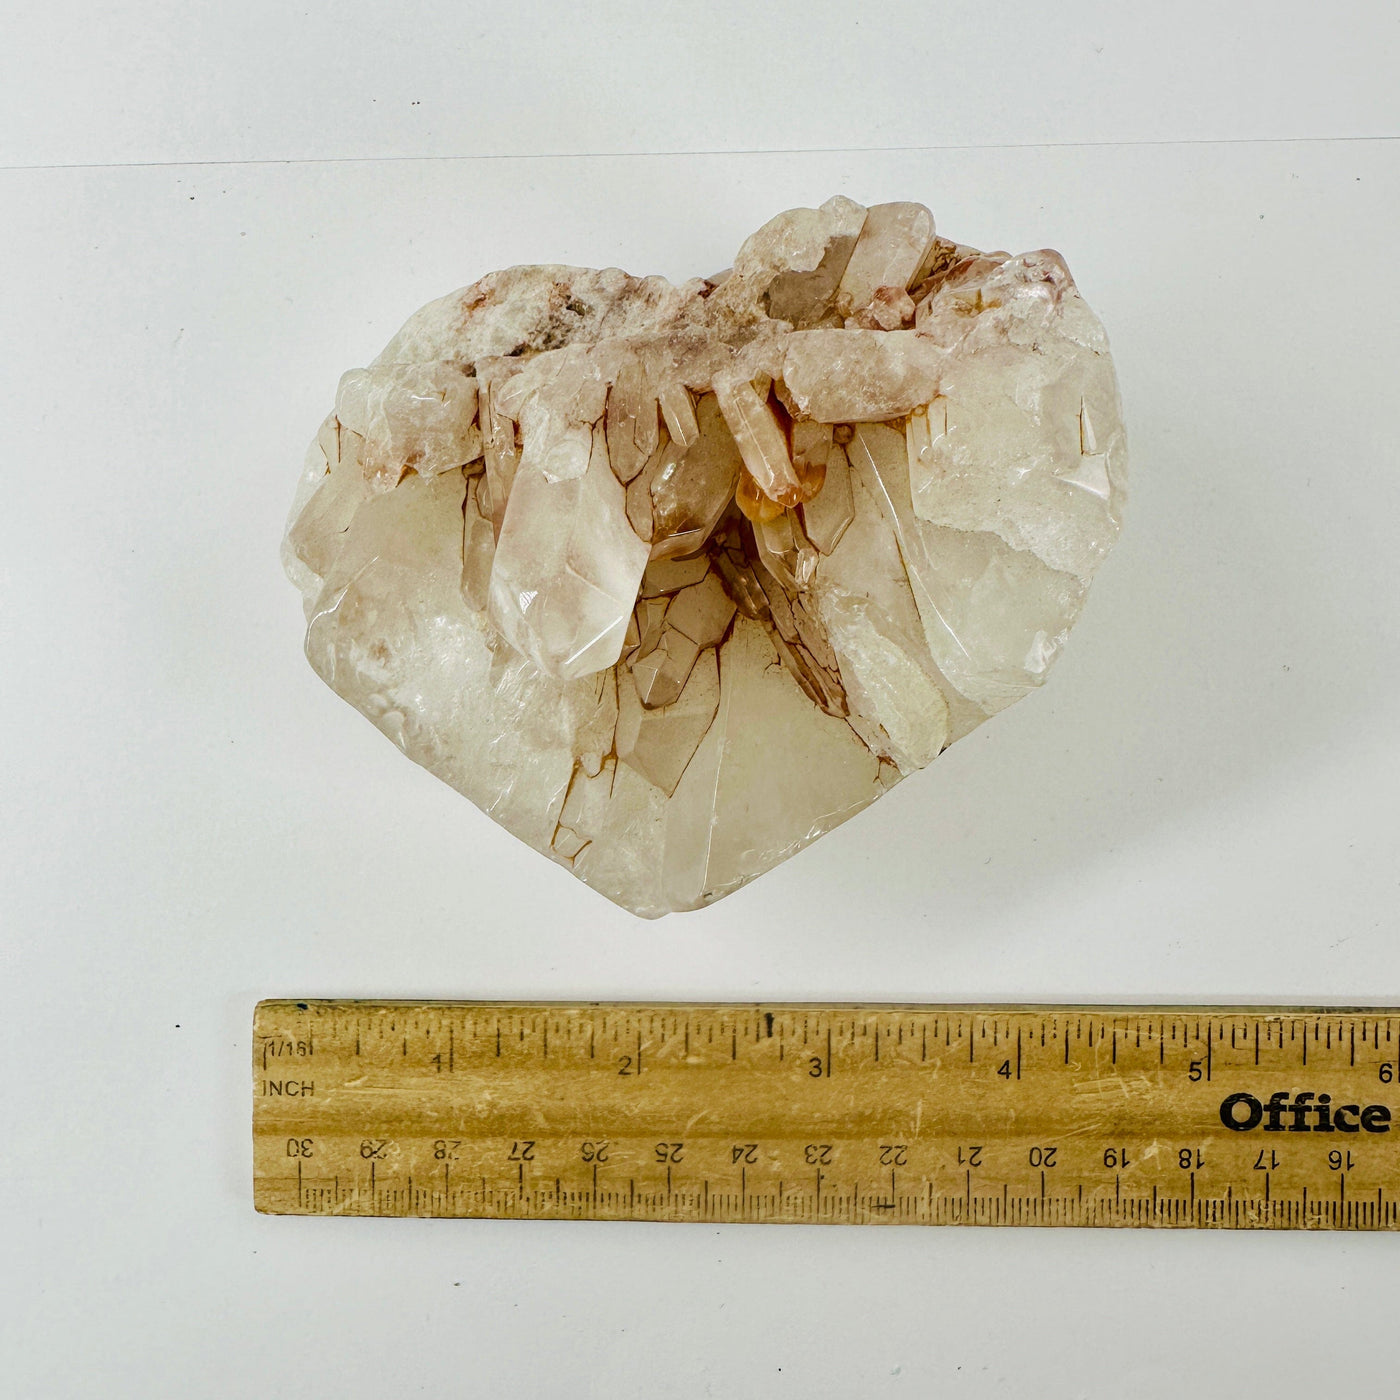 Crystal Quartz Cluster Heart top view with ruler for size reference